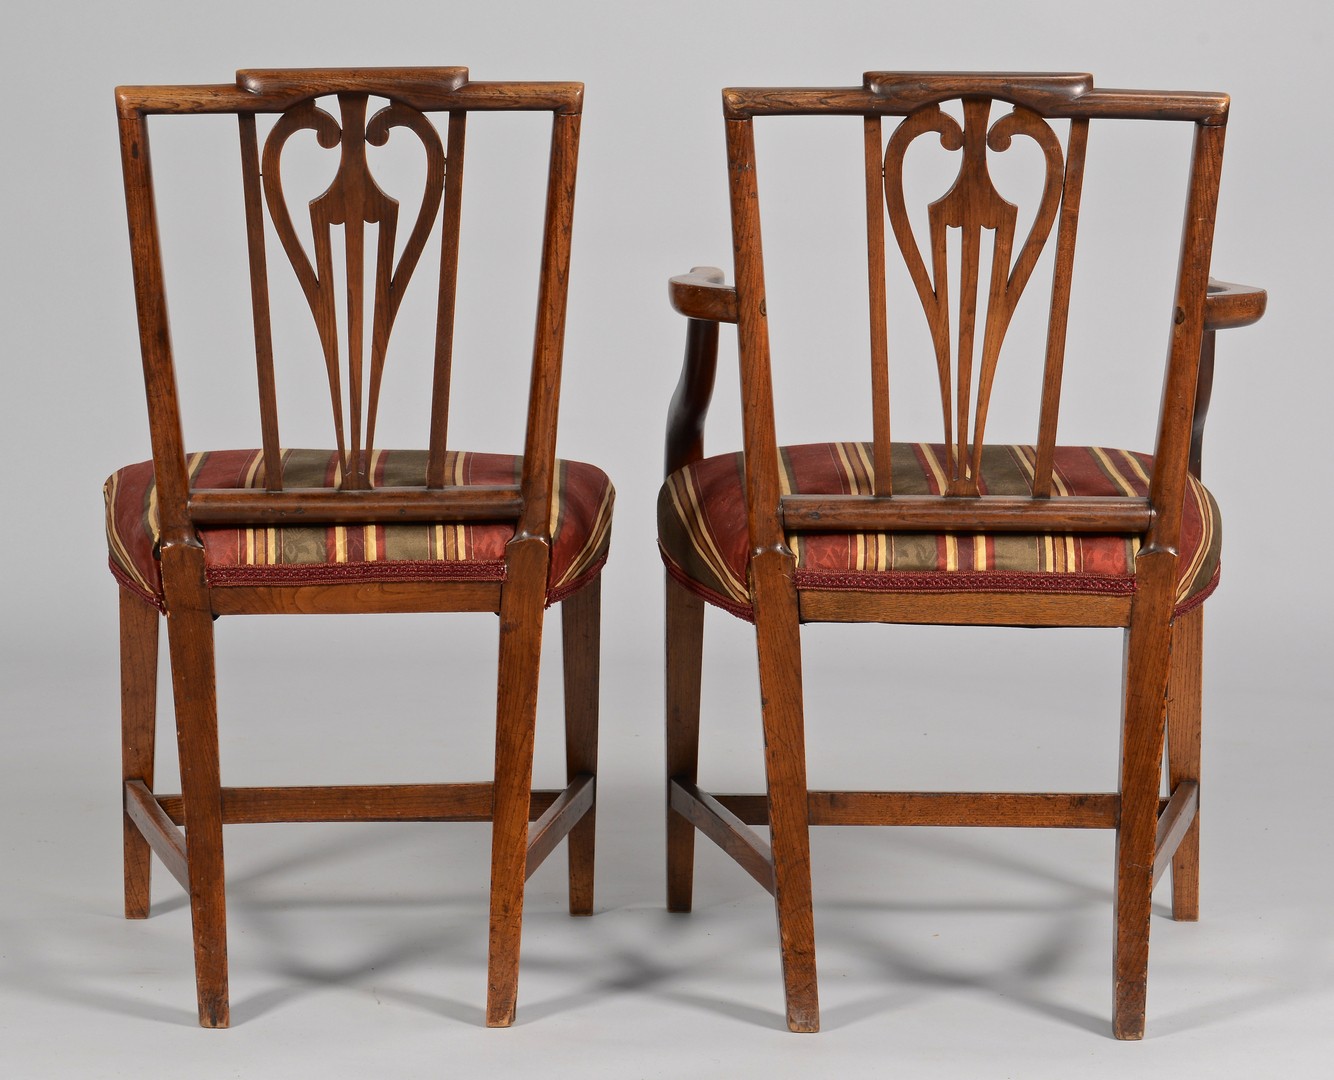 Lot 101: Set of 6 English Dining Chairs c. 1800